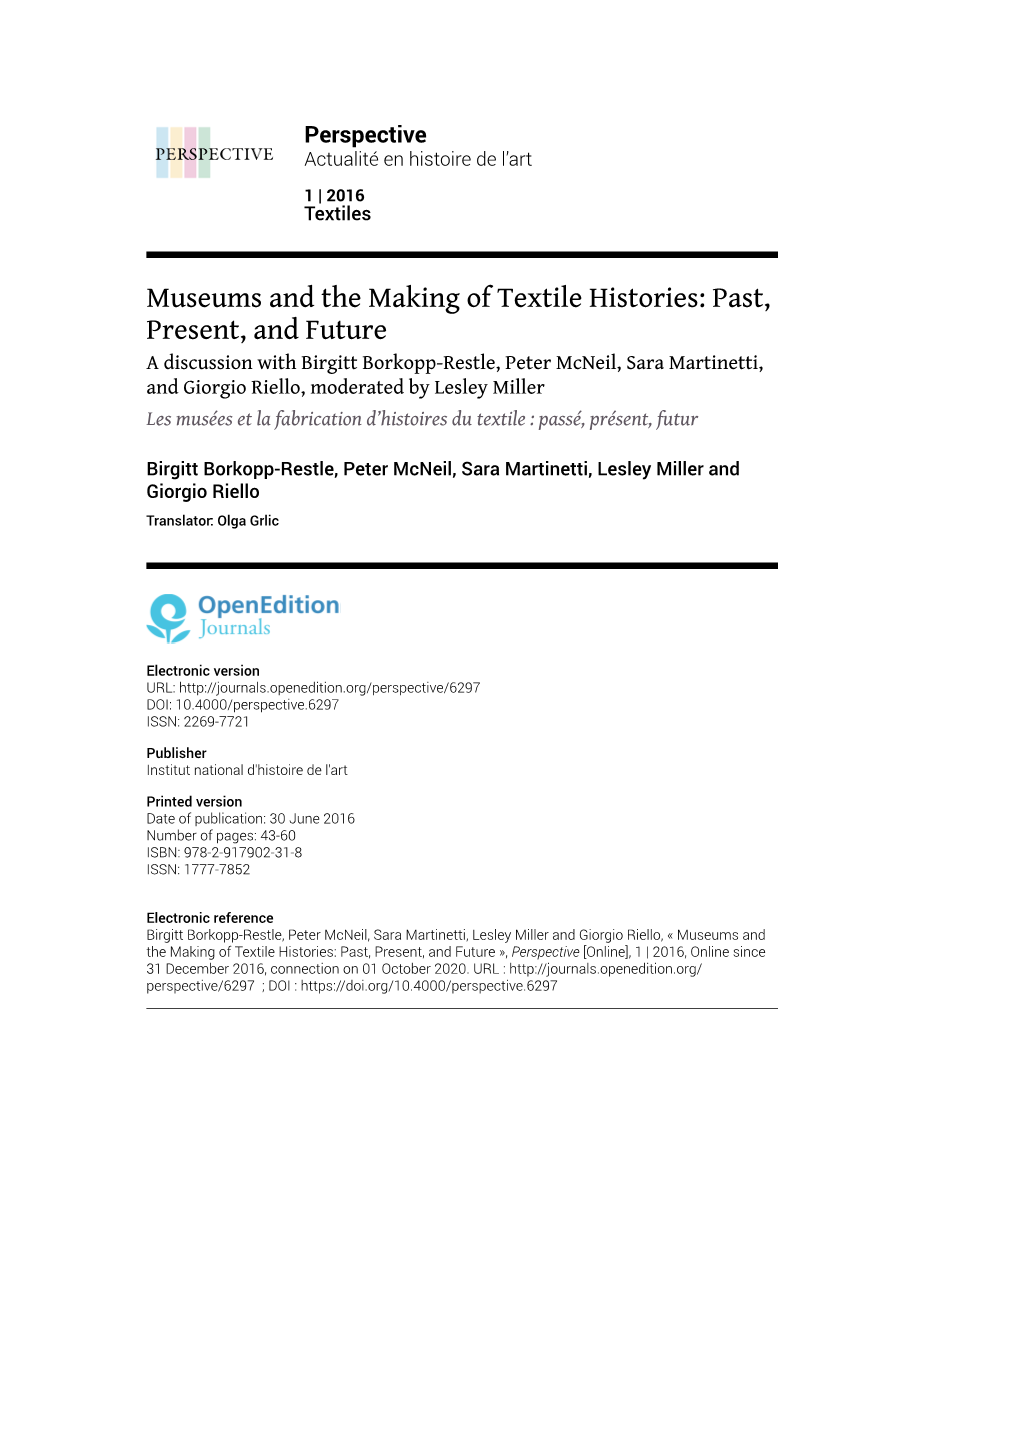 Museums and the Making of Textile Histories: Past, Present, and Future